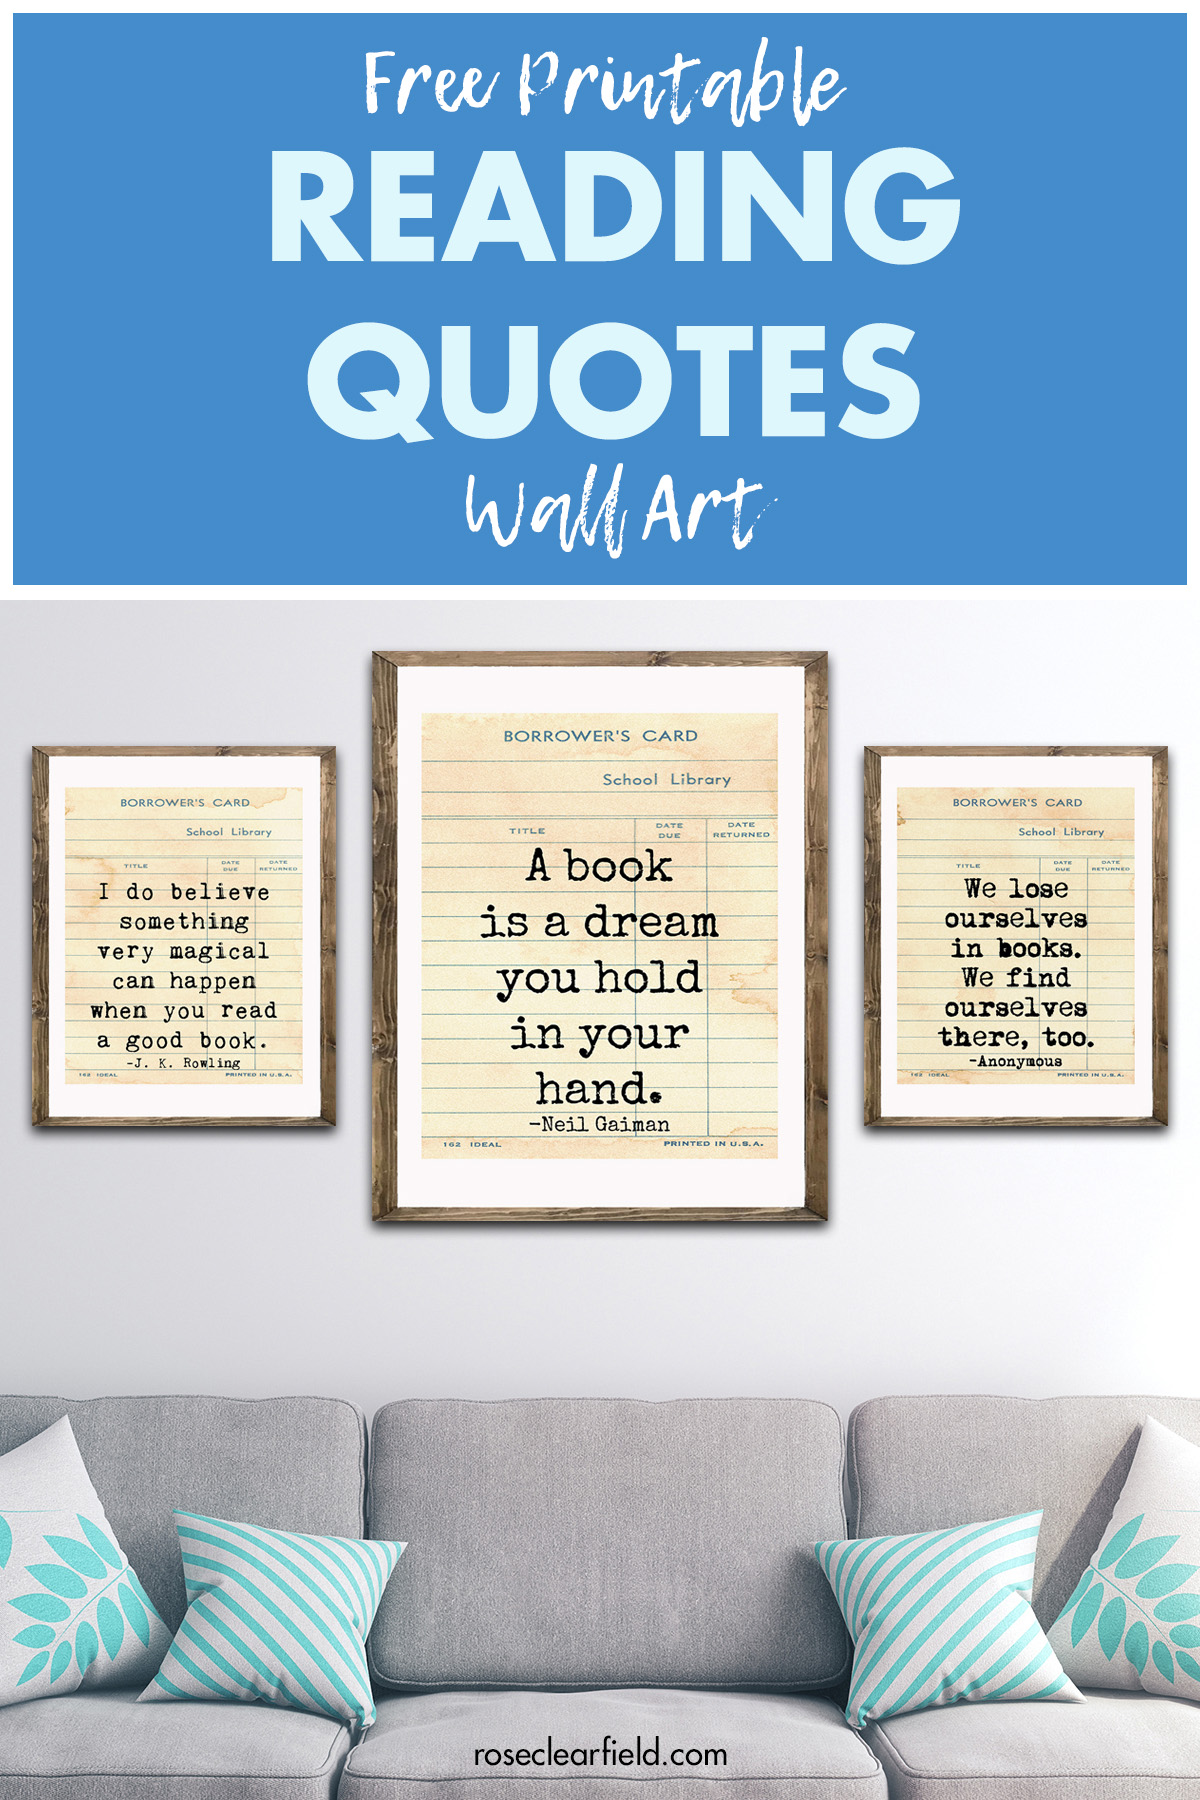 Free Printable Library Card Reading Quotes Wall Art Rose Clearfield